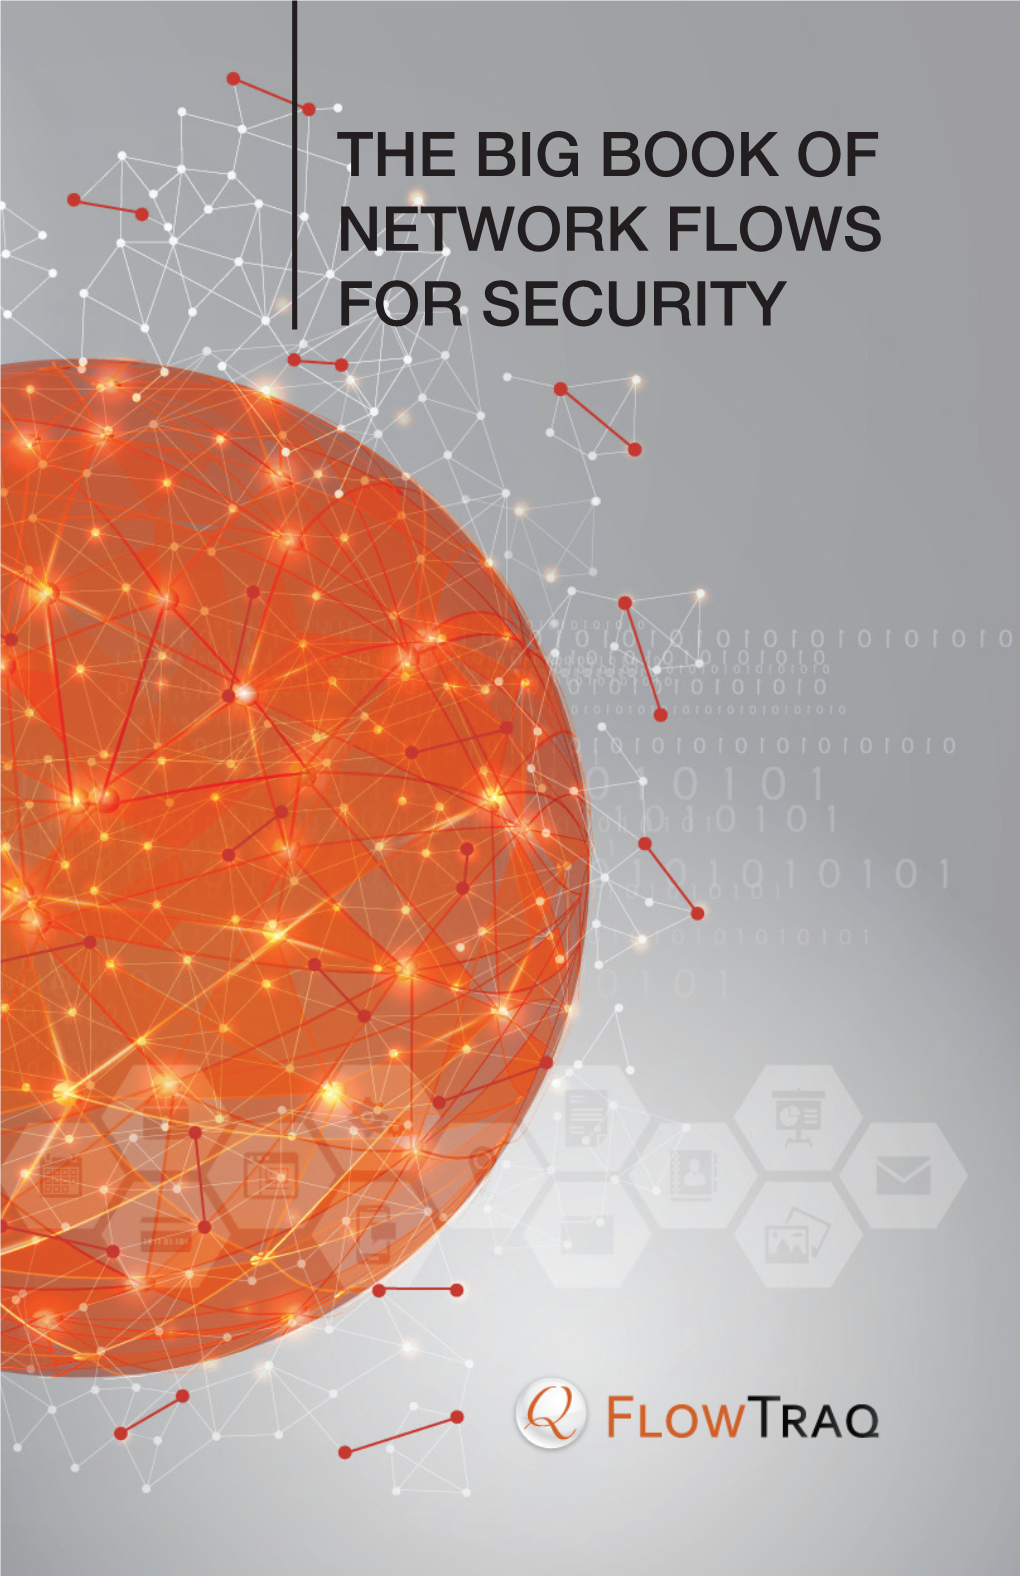 The Big Book of Network Flows for Security 2